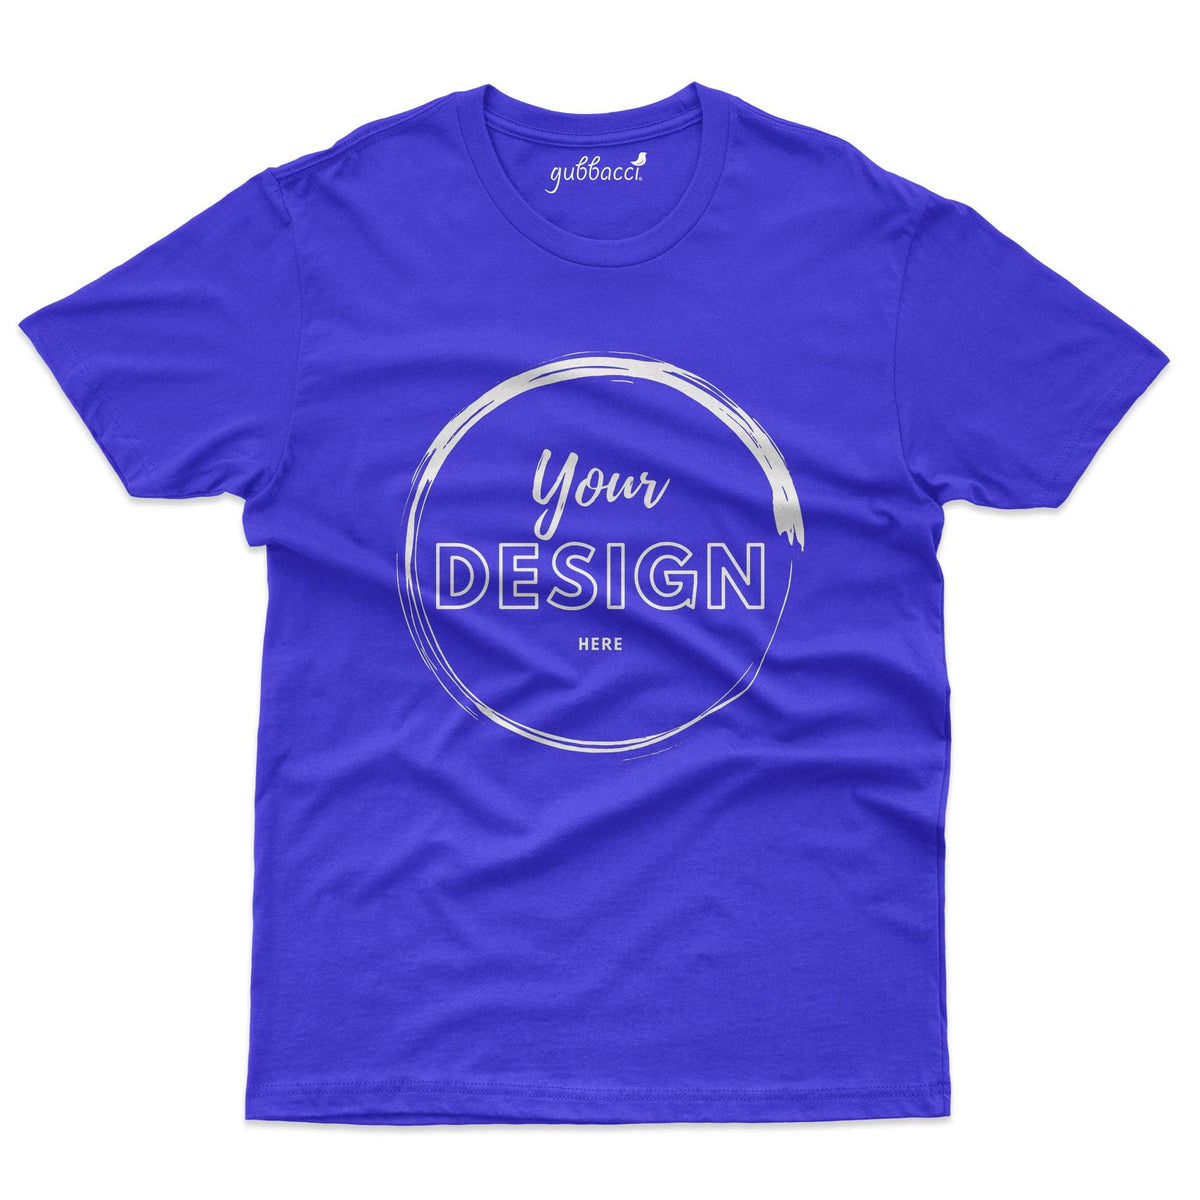 Customized T-shirts as gifts to your family and friends in India